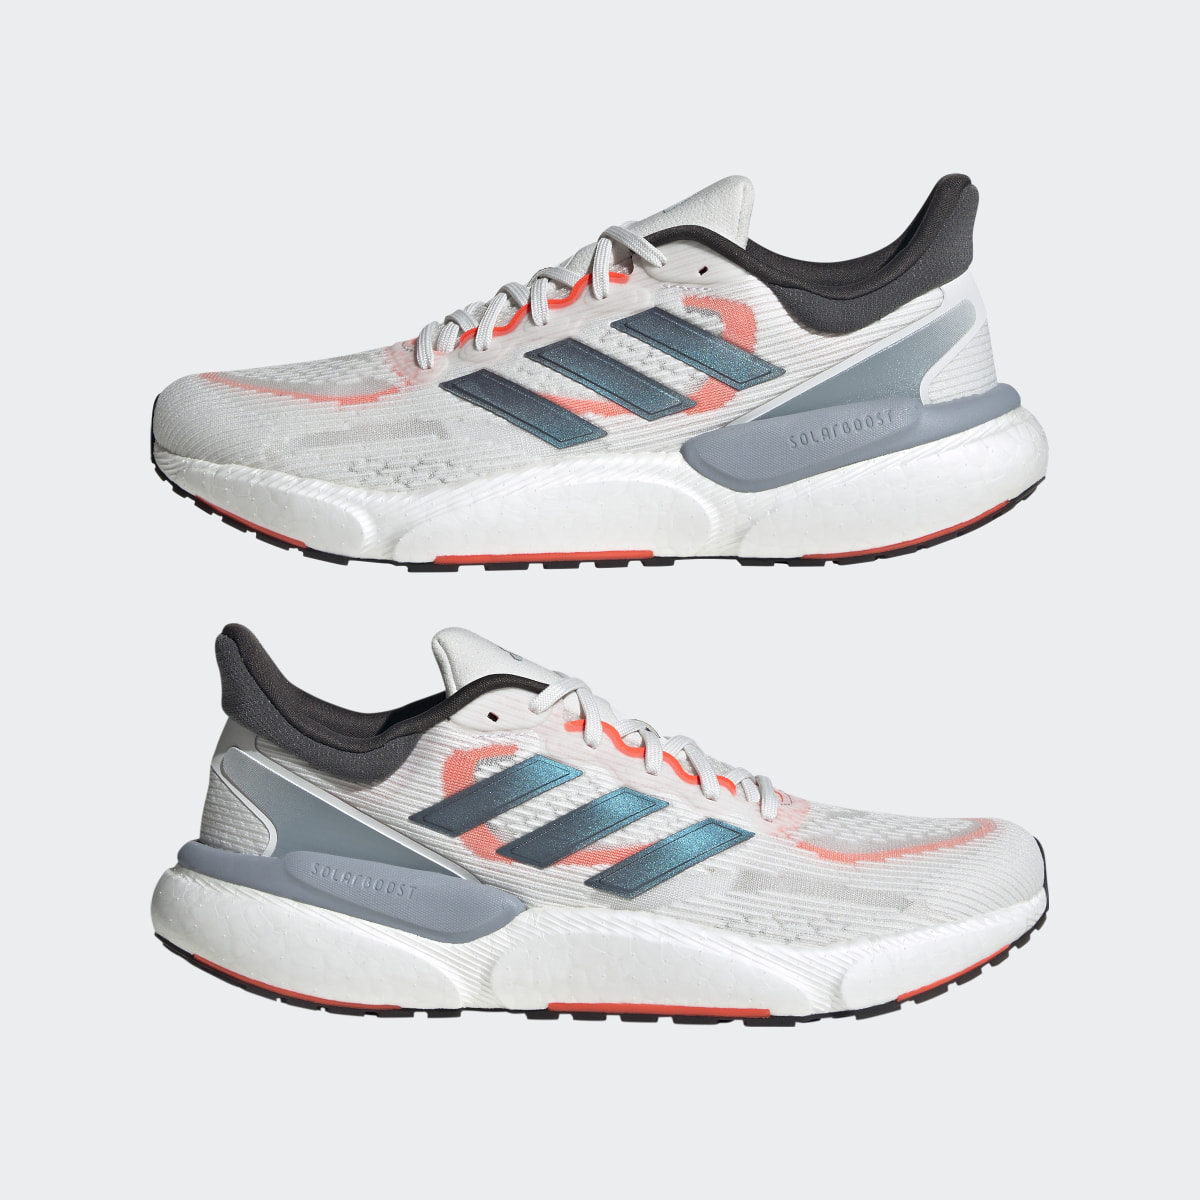 Adidas Solarboost 5 Shoes. 11